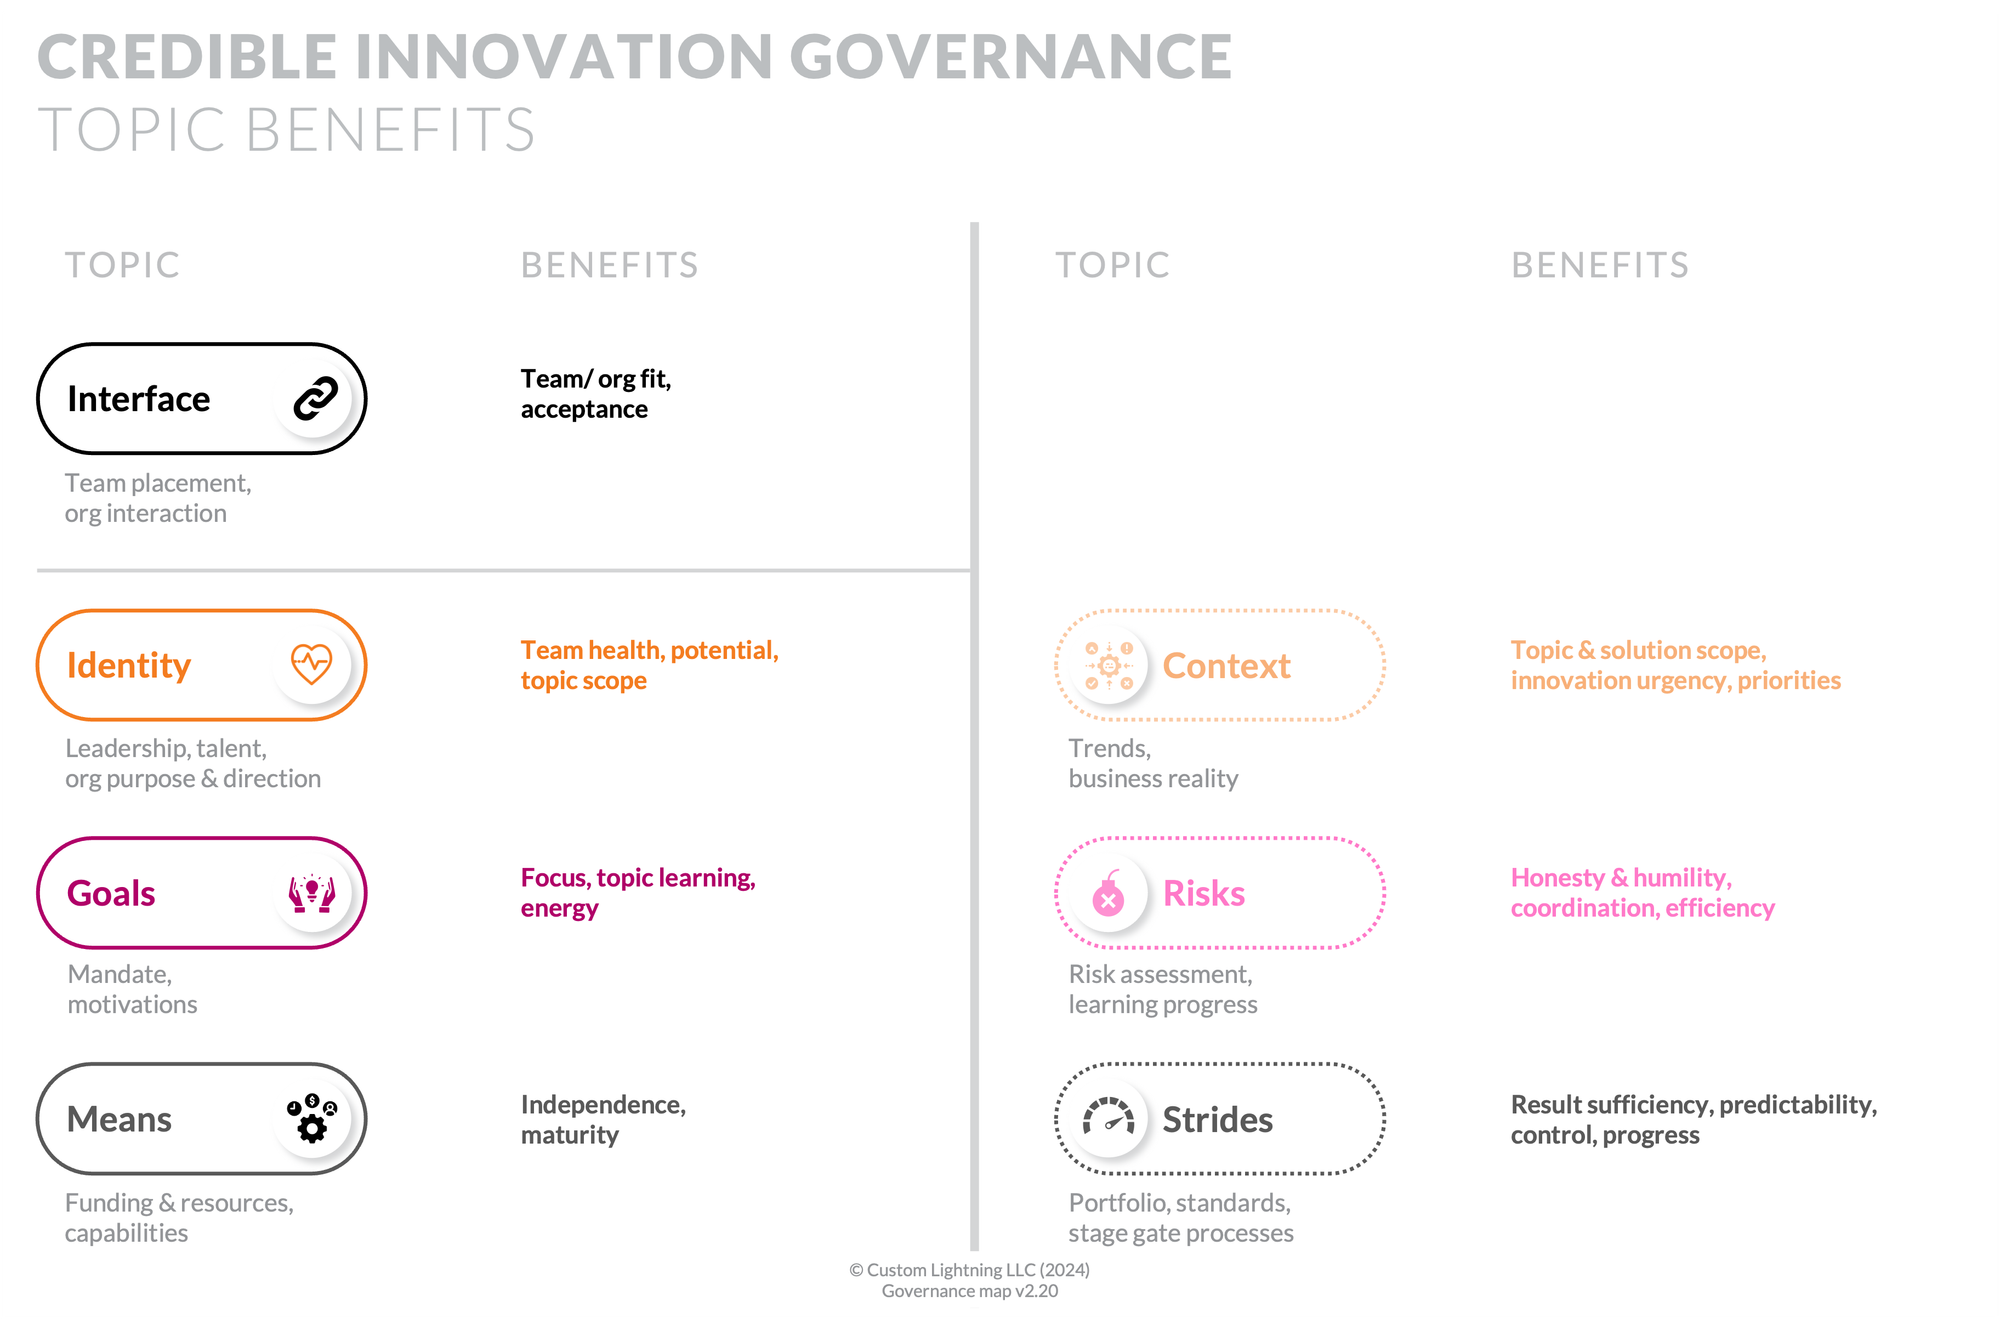 Benefits one gains from each of the 7 Credible Innovation Governance topics, as listed below